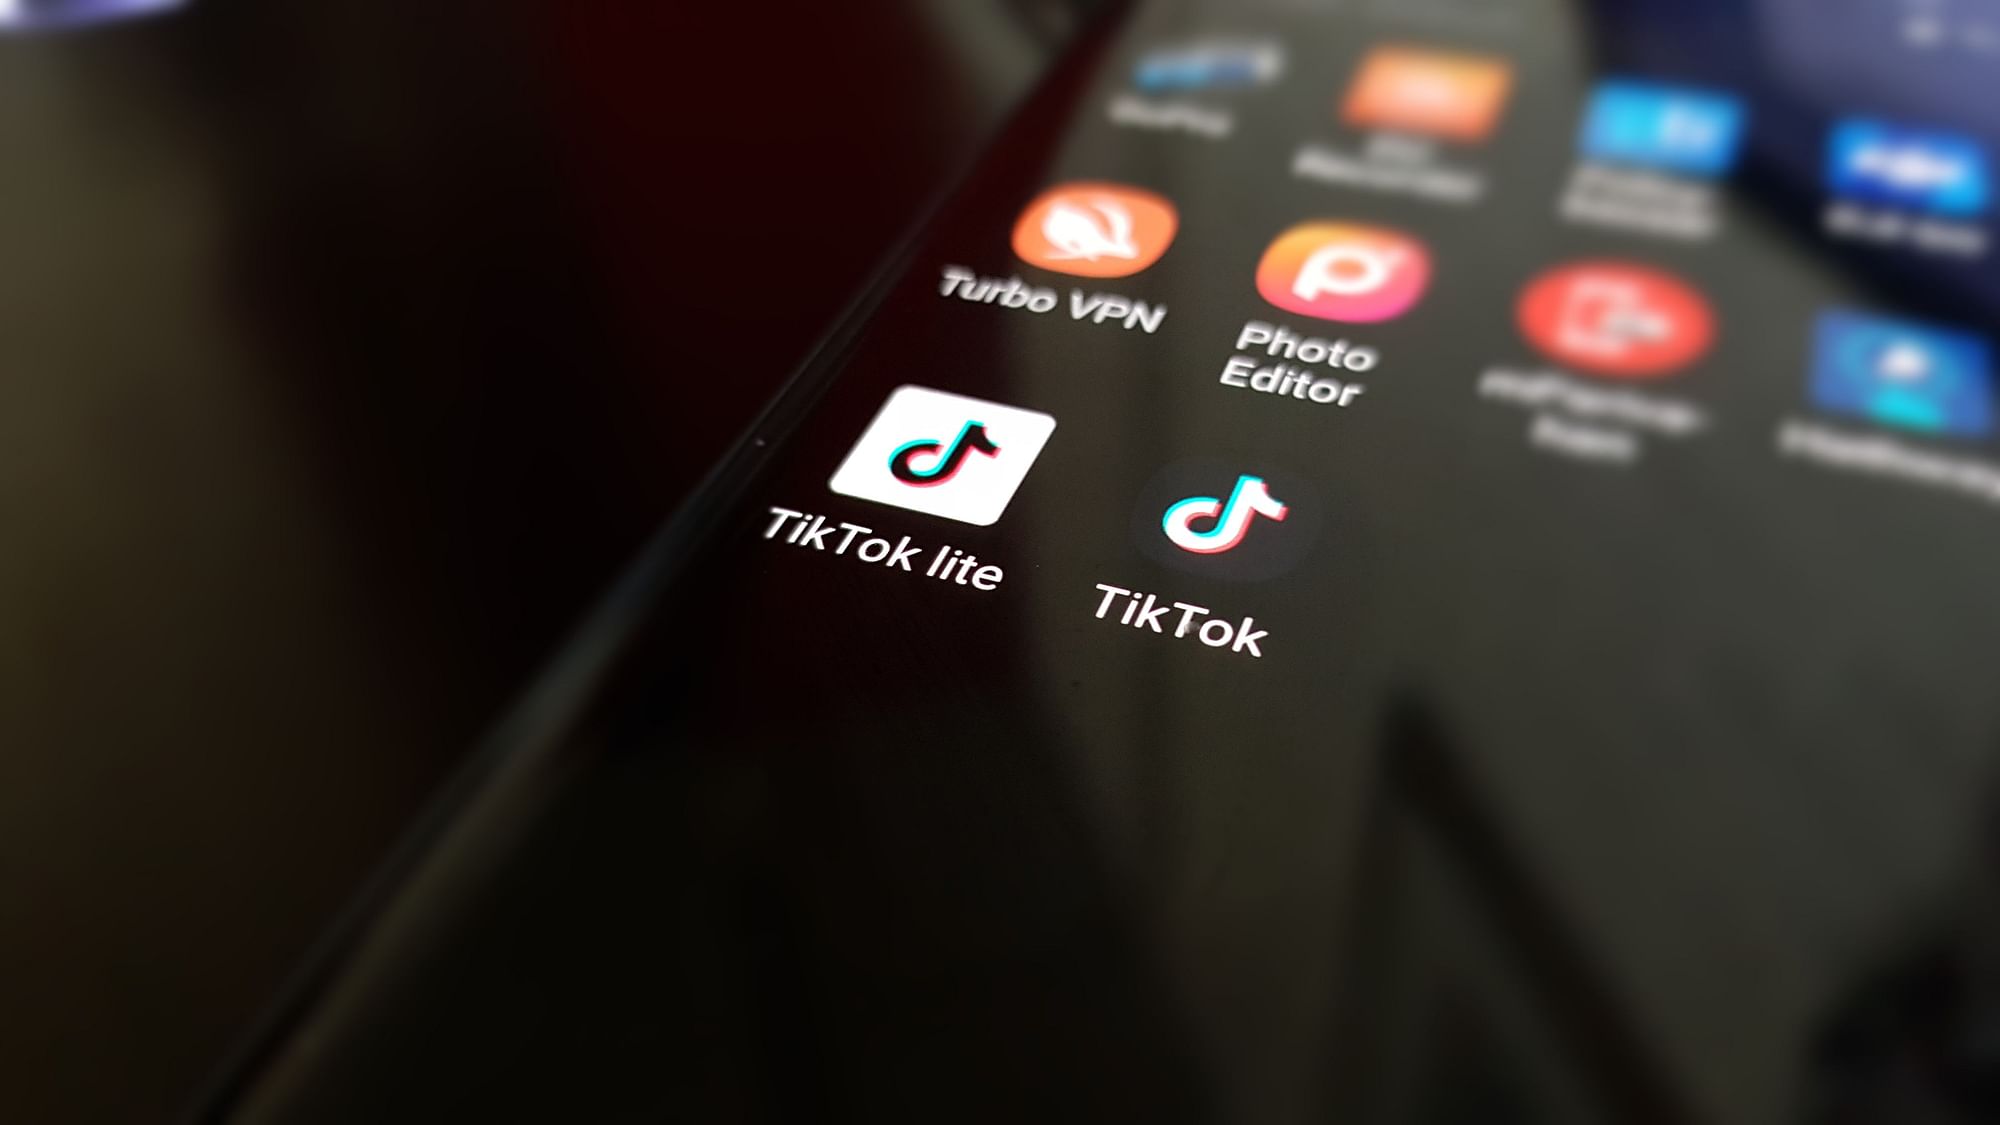 TikTok has been taken off the Google Playstore and Apple app stores in India.